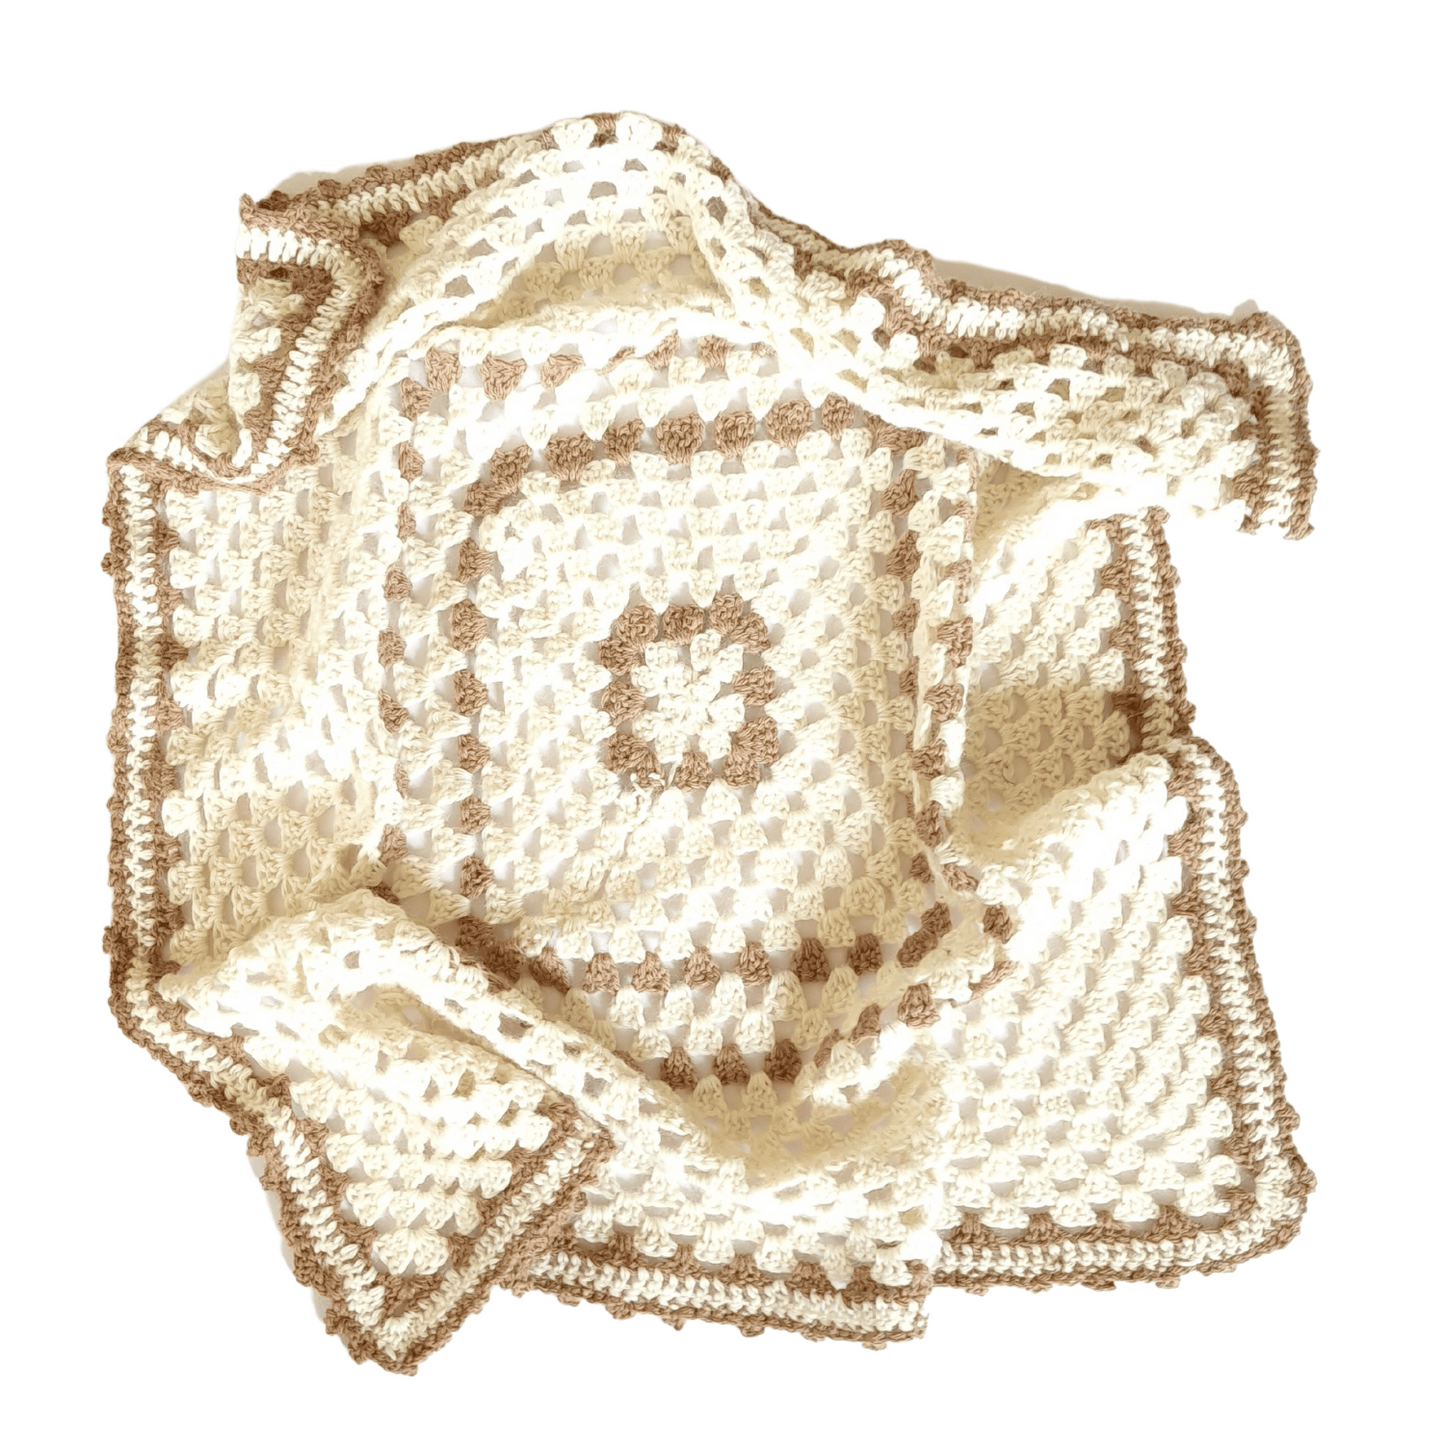 Our baby car seat blanket crochet kit, made in off-white and sandstone made with British and Irish alpaca wool